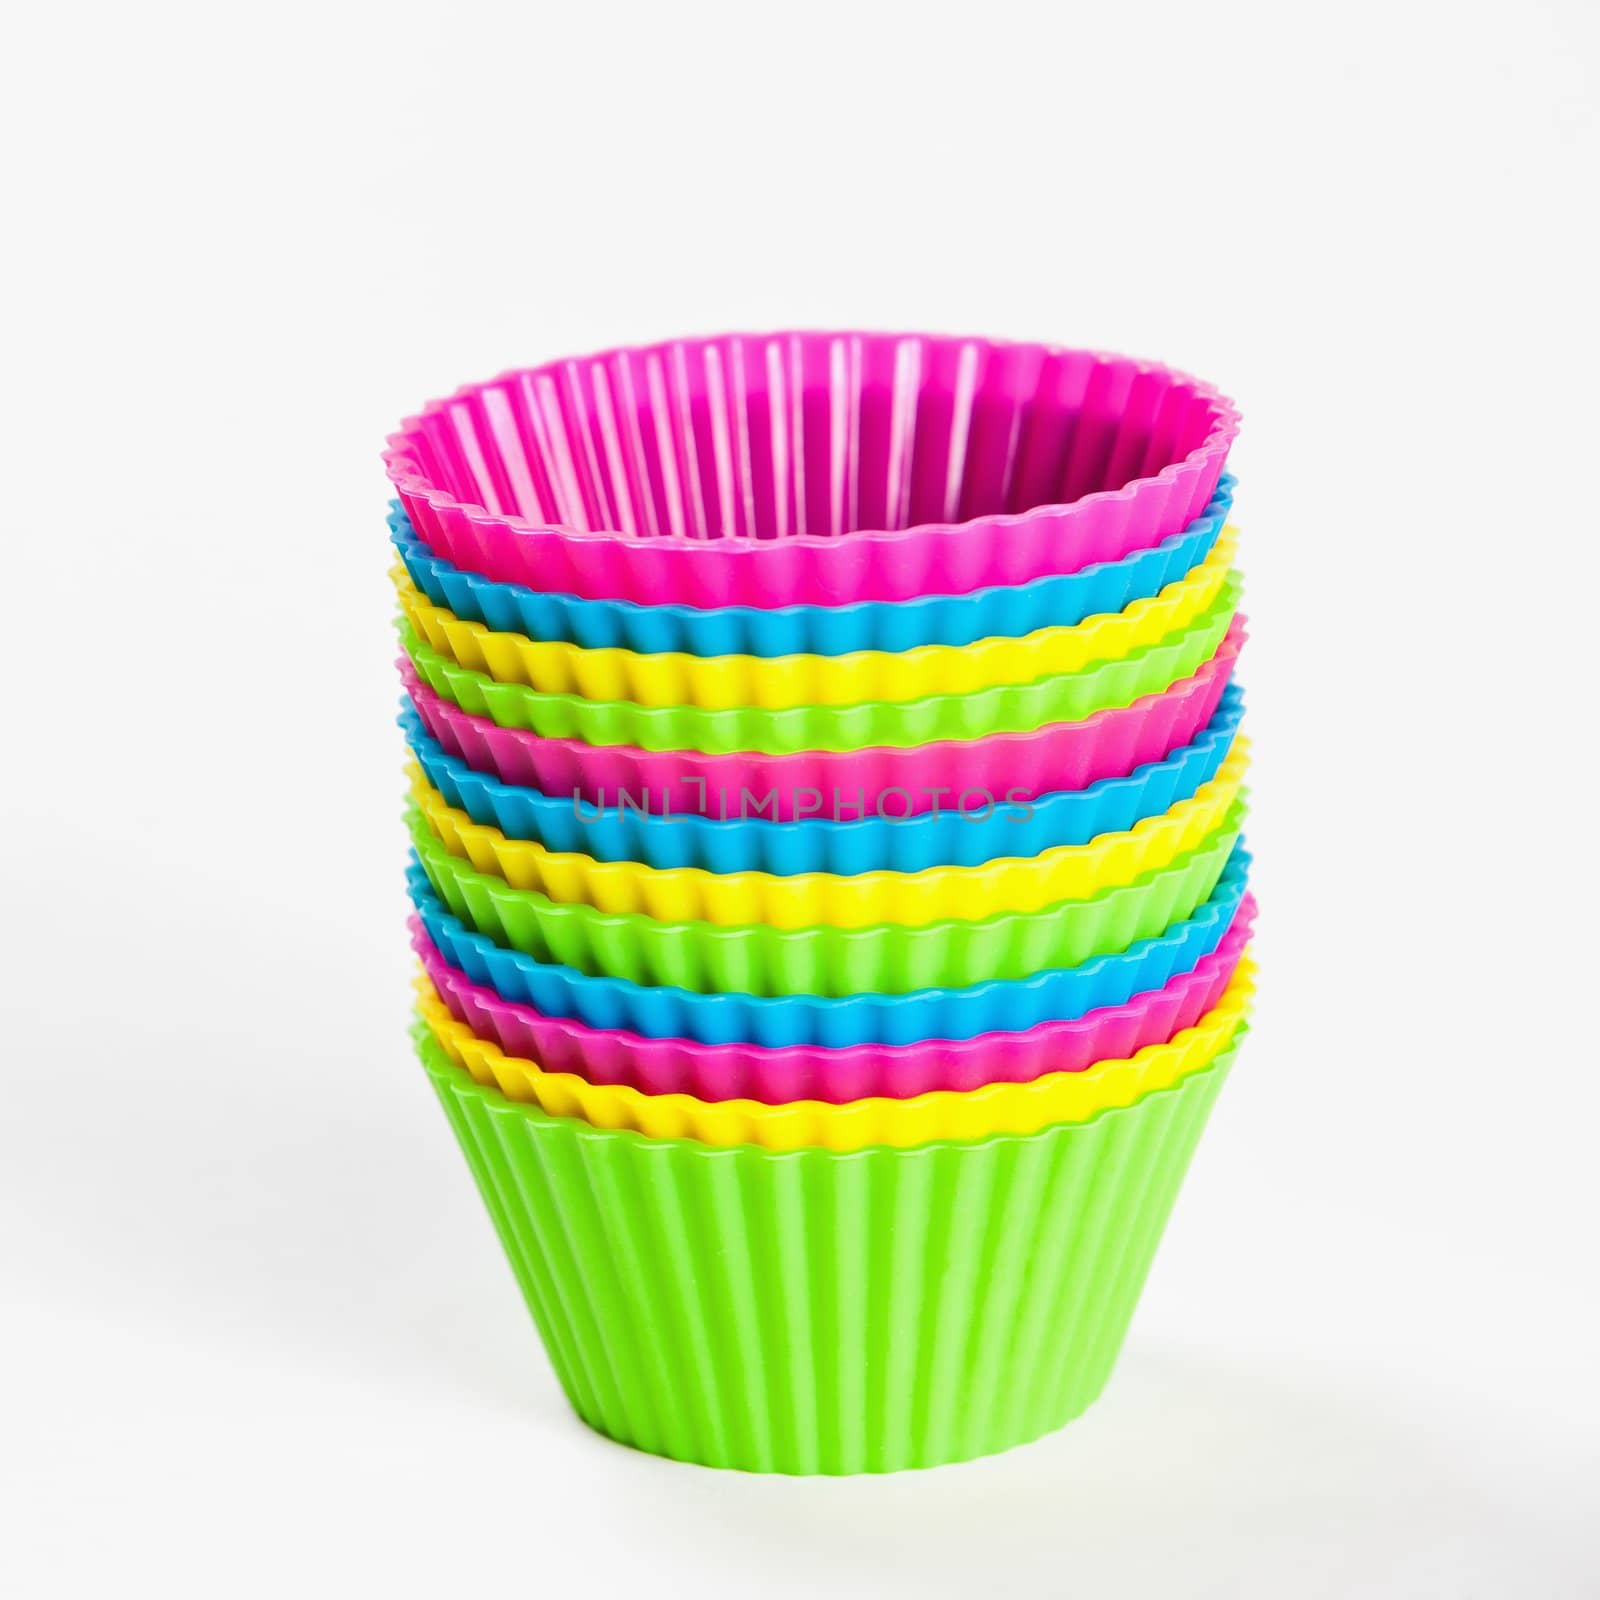 baking silicone cups for cupcakes or muffins on white background